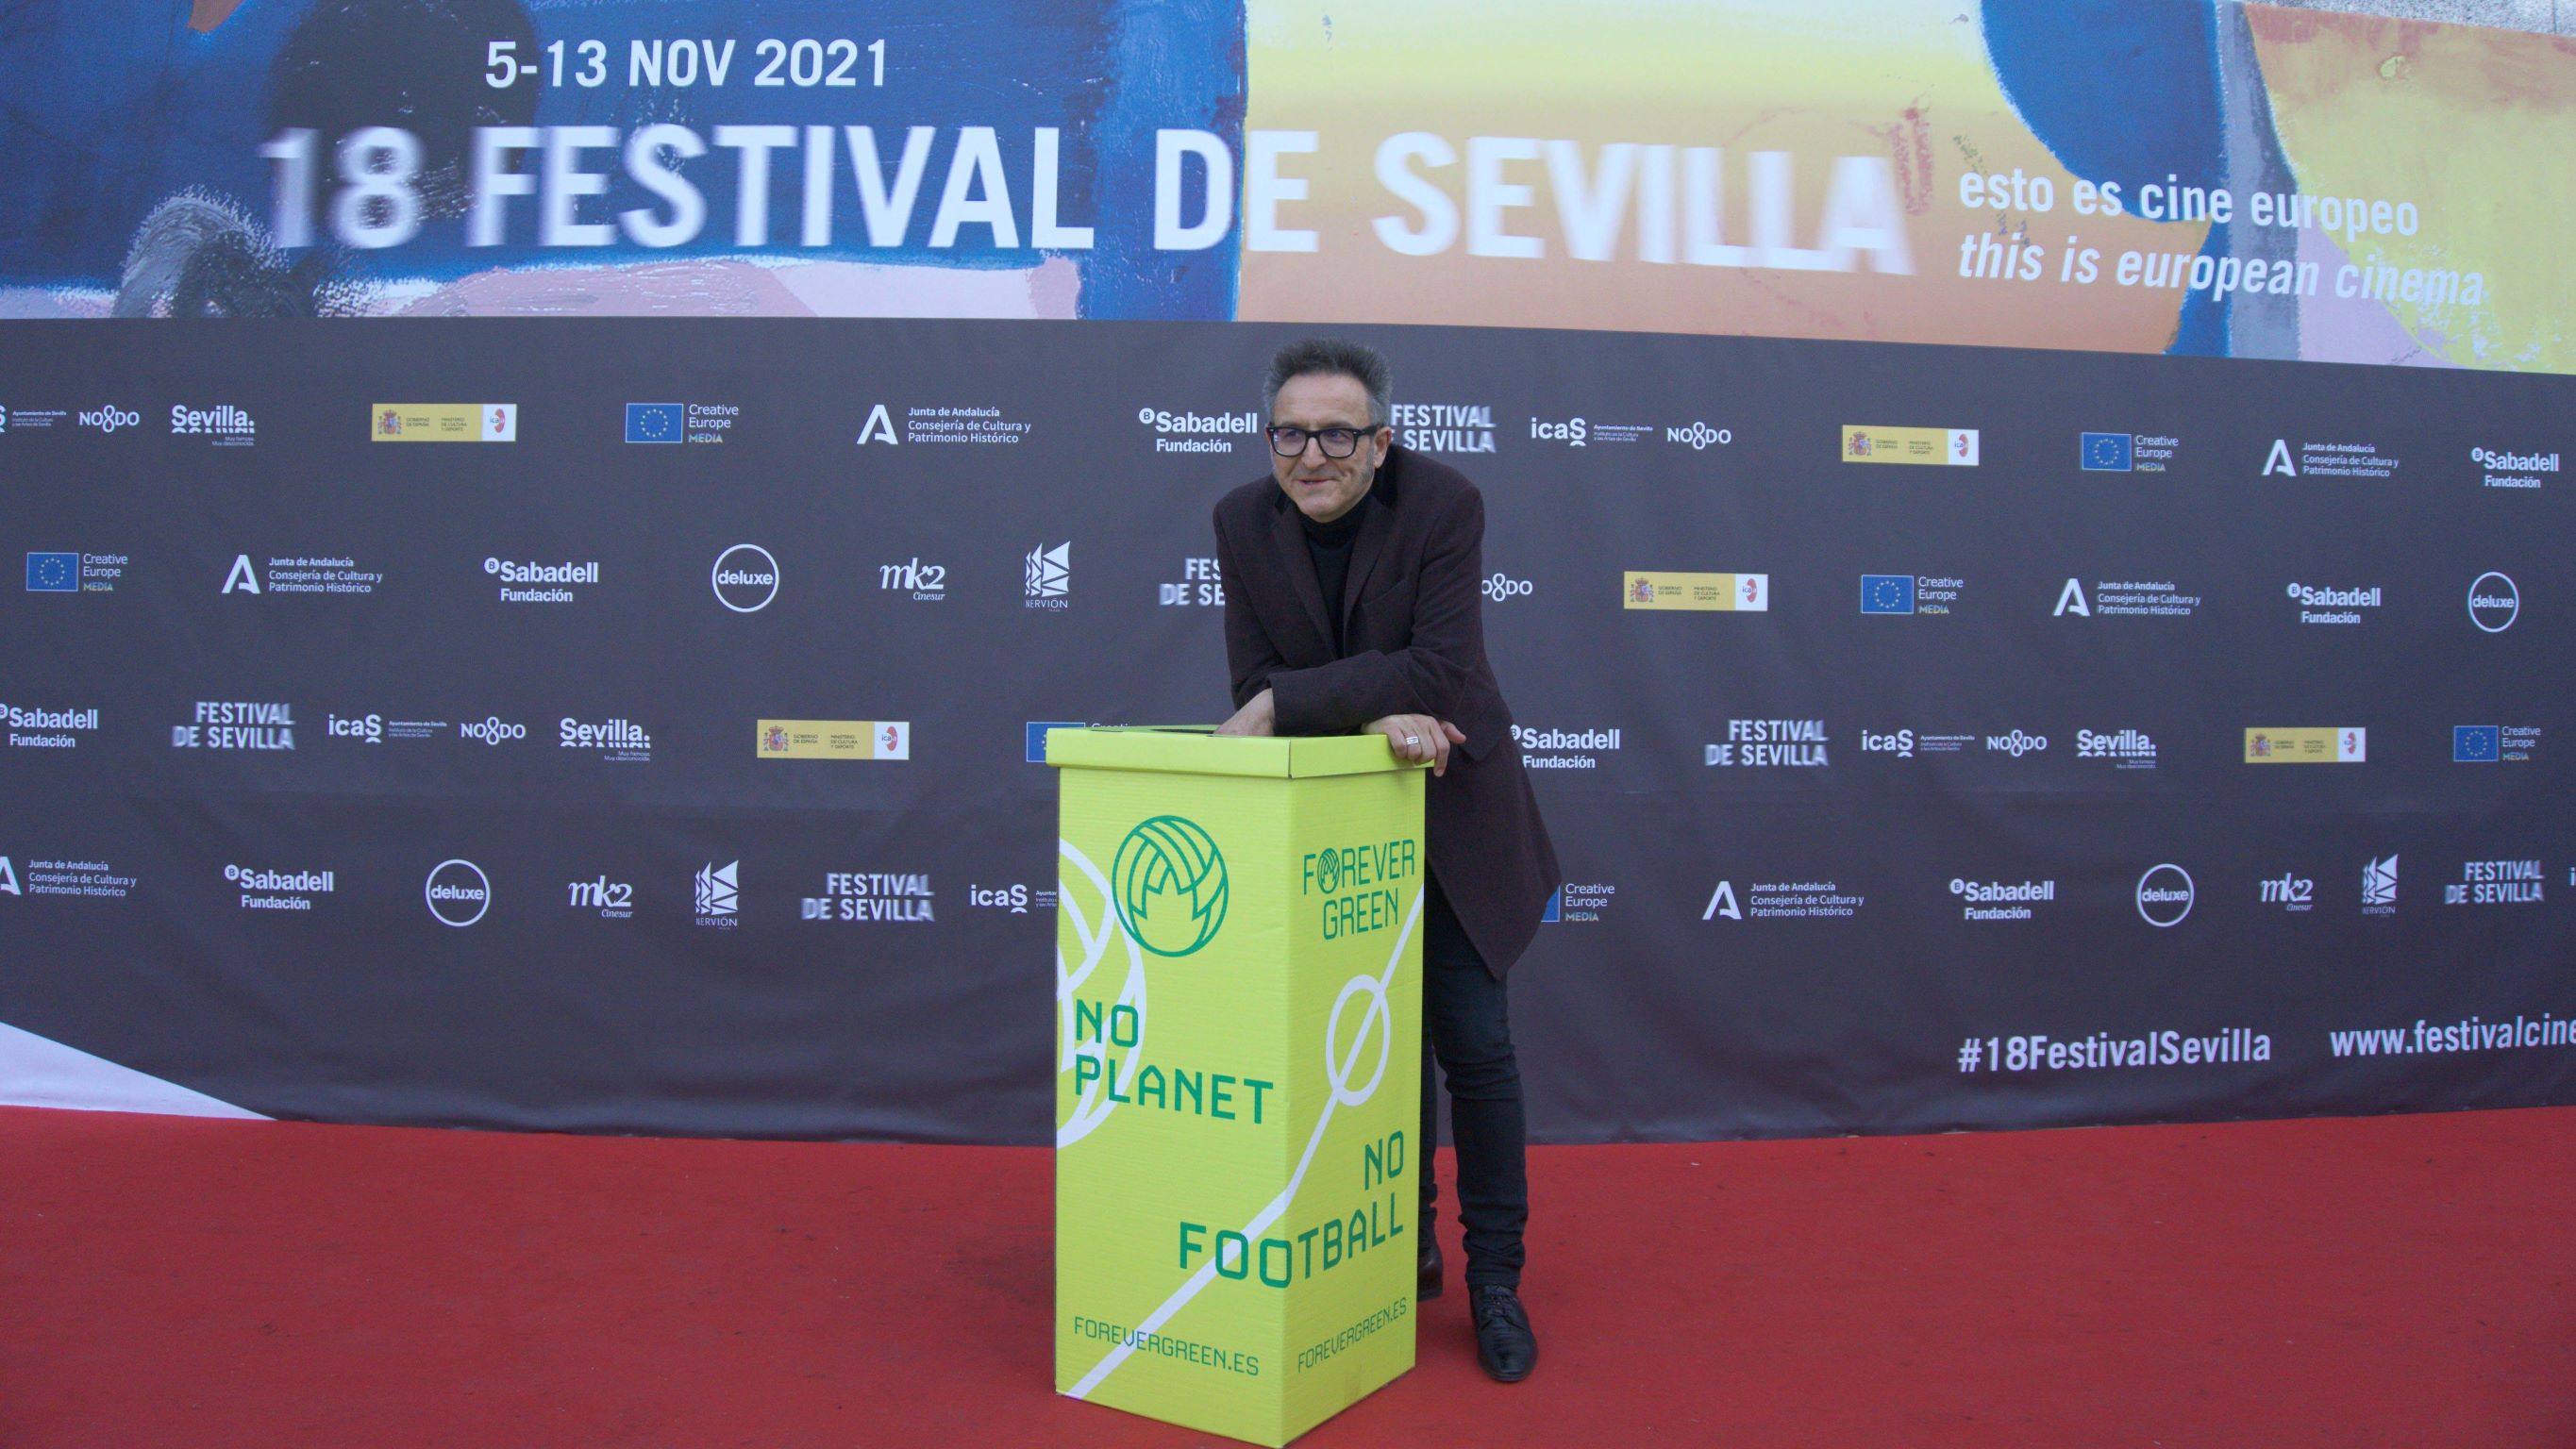 El Festival de Cine Europeo de Sevilla and Forever Green join forces to work for the environment